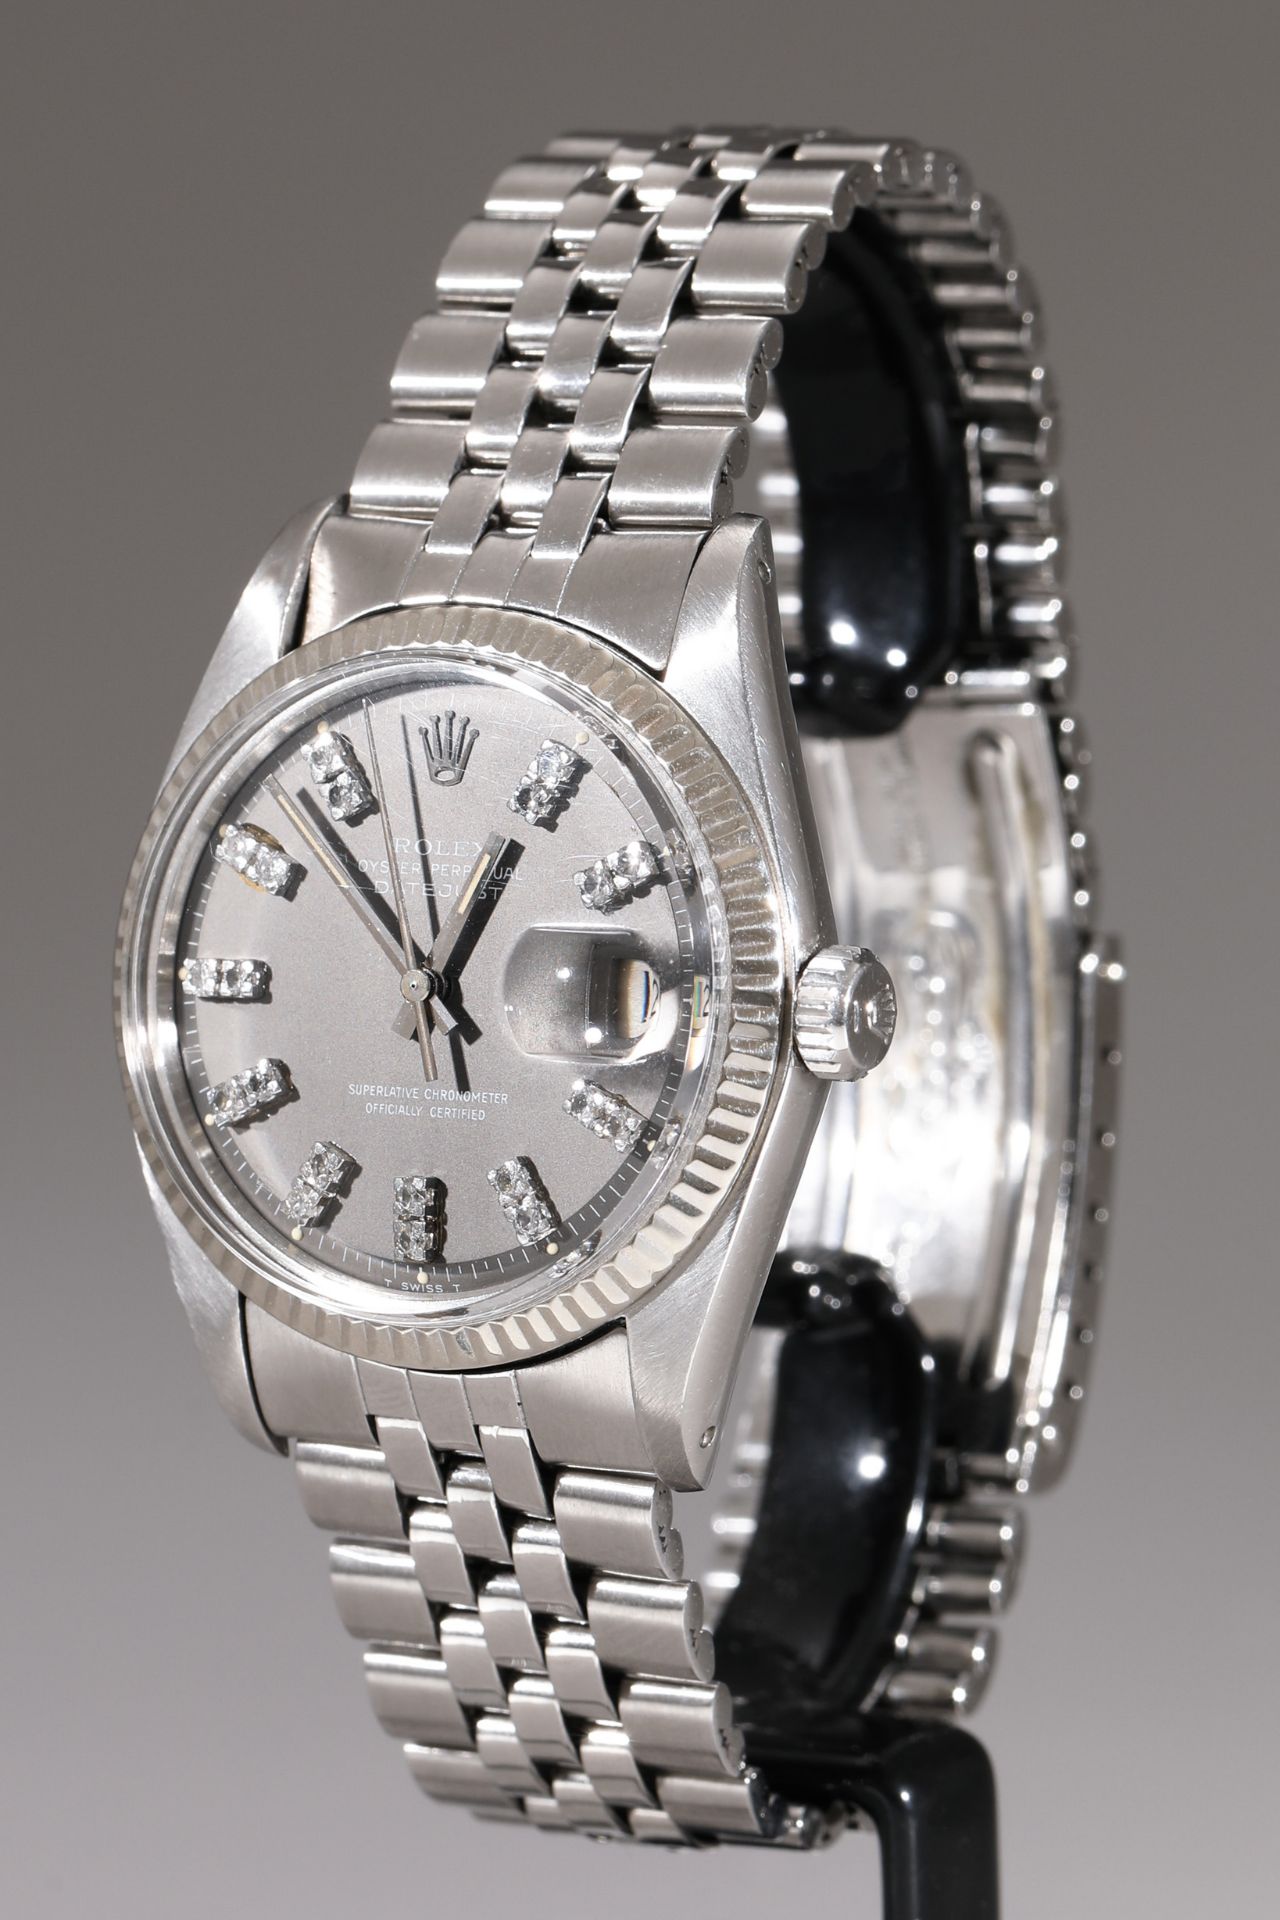 Rolex Oyster Perpetual Datejust. Ref.1601 automatic men's watch - Image 2 of 8